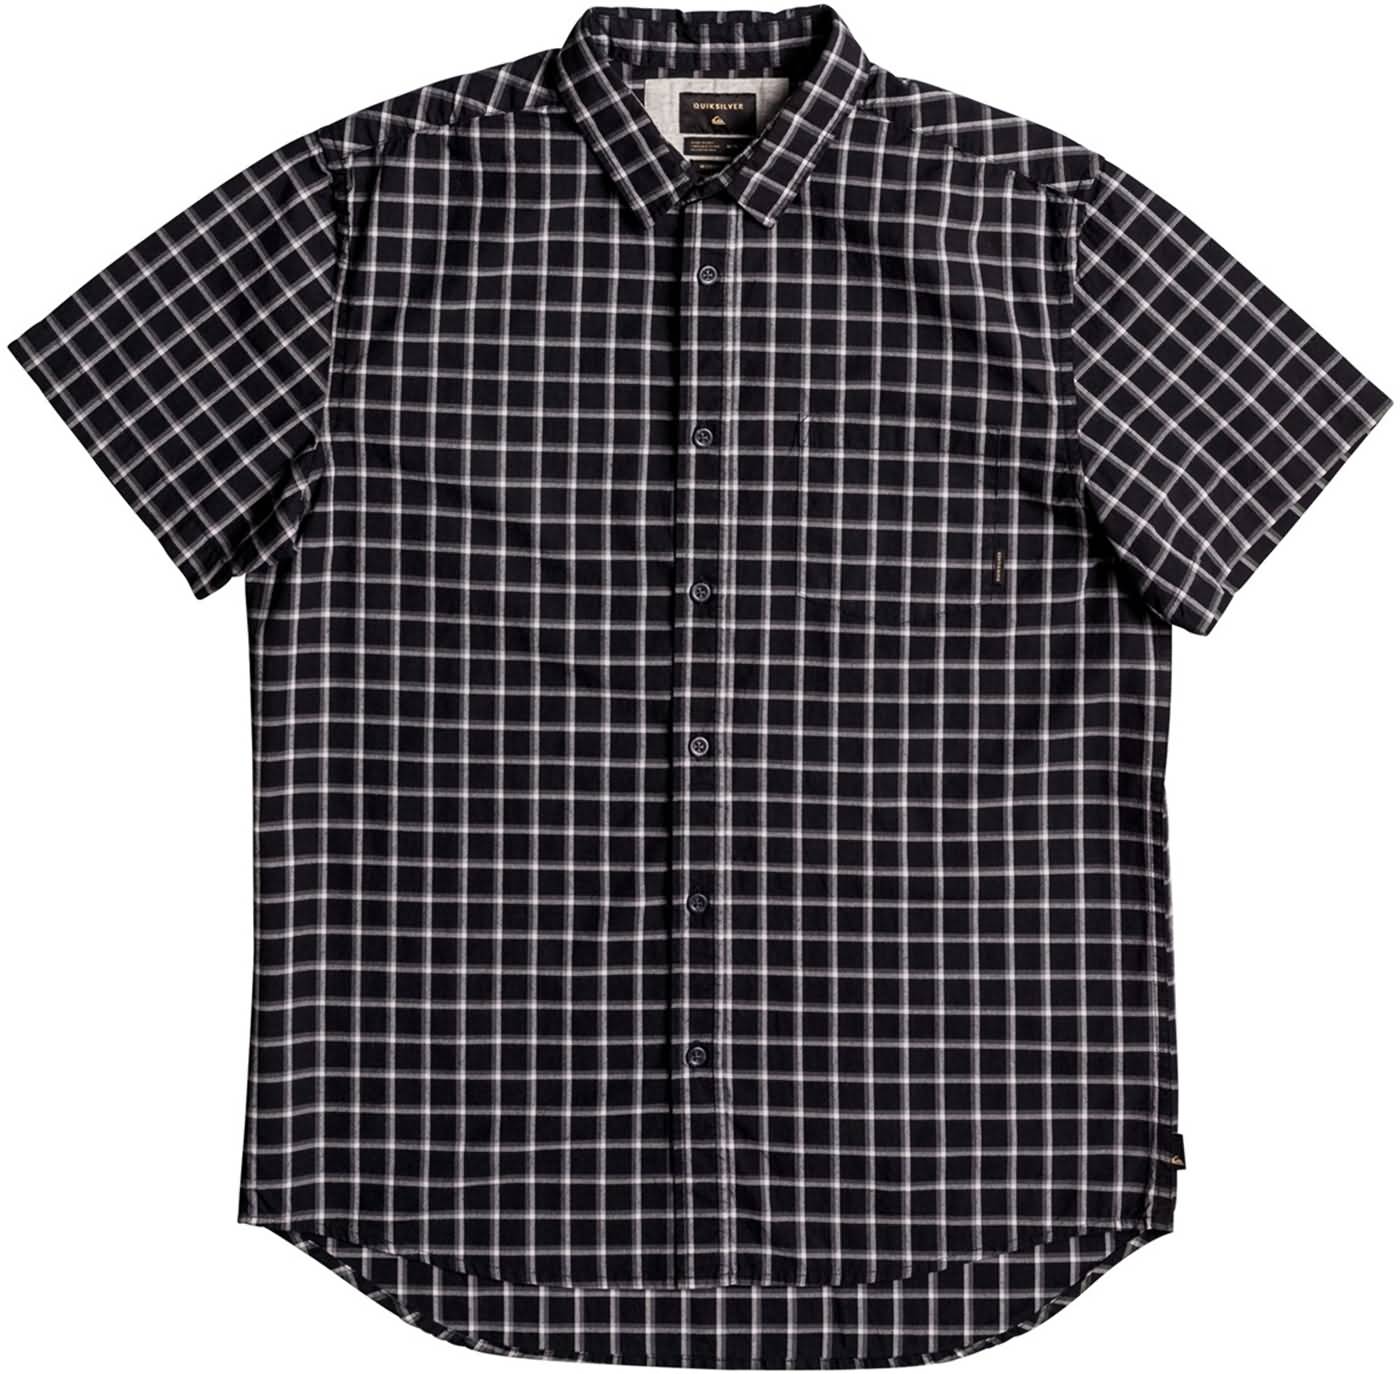 Quiksilver Surf Fall 2017 Mens Button Up Short Sleeve Shirts Preview